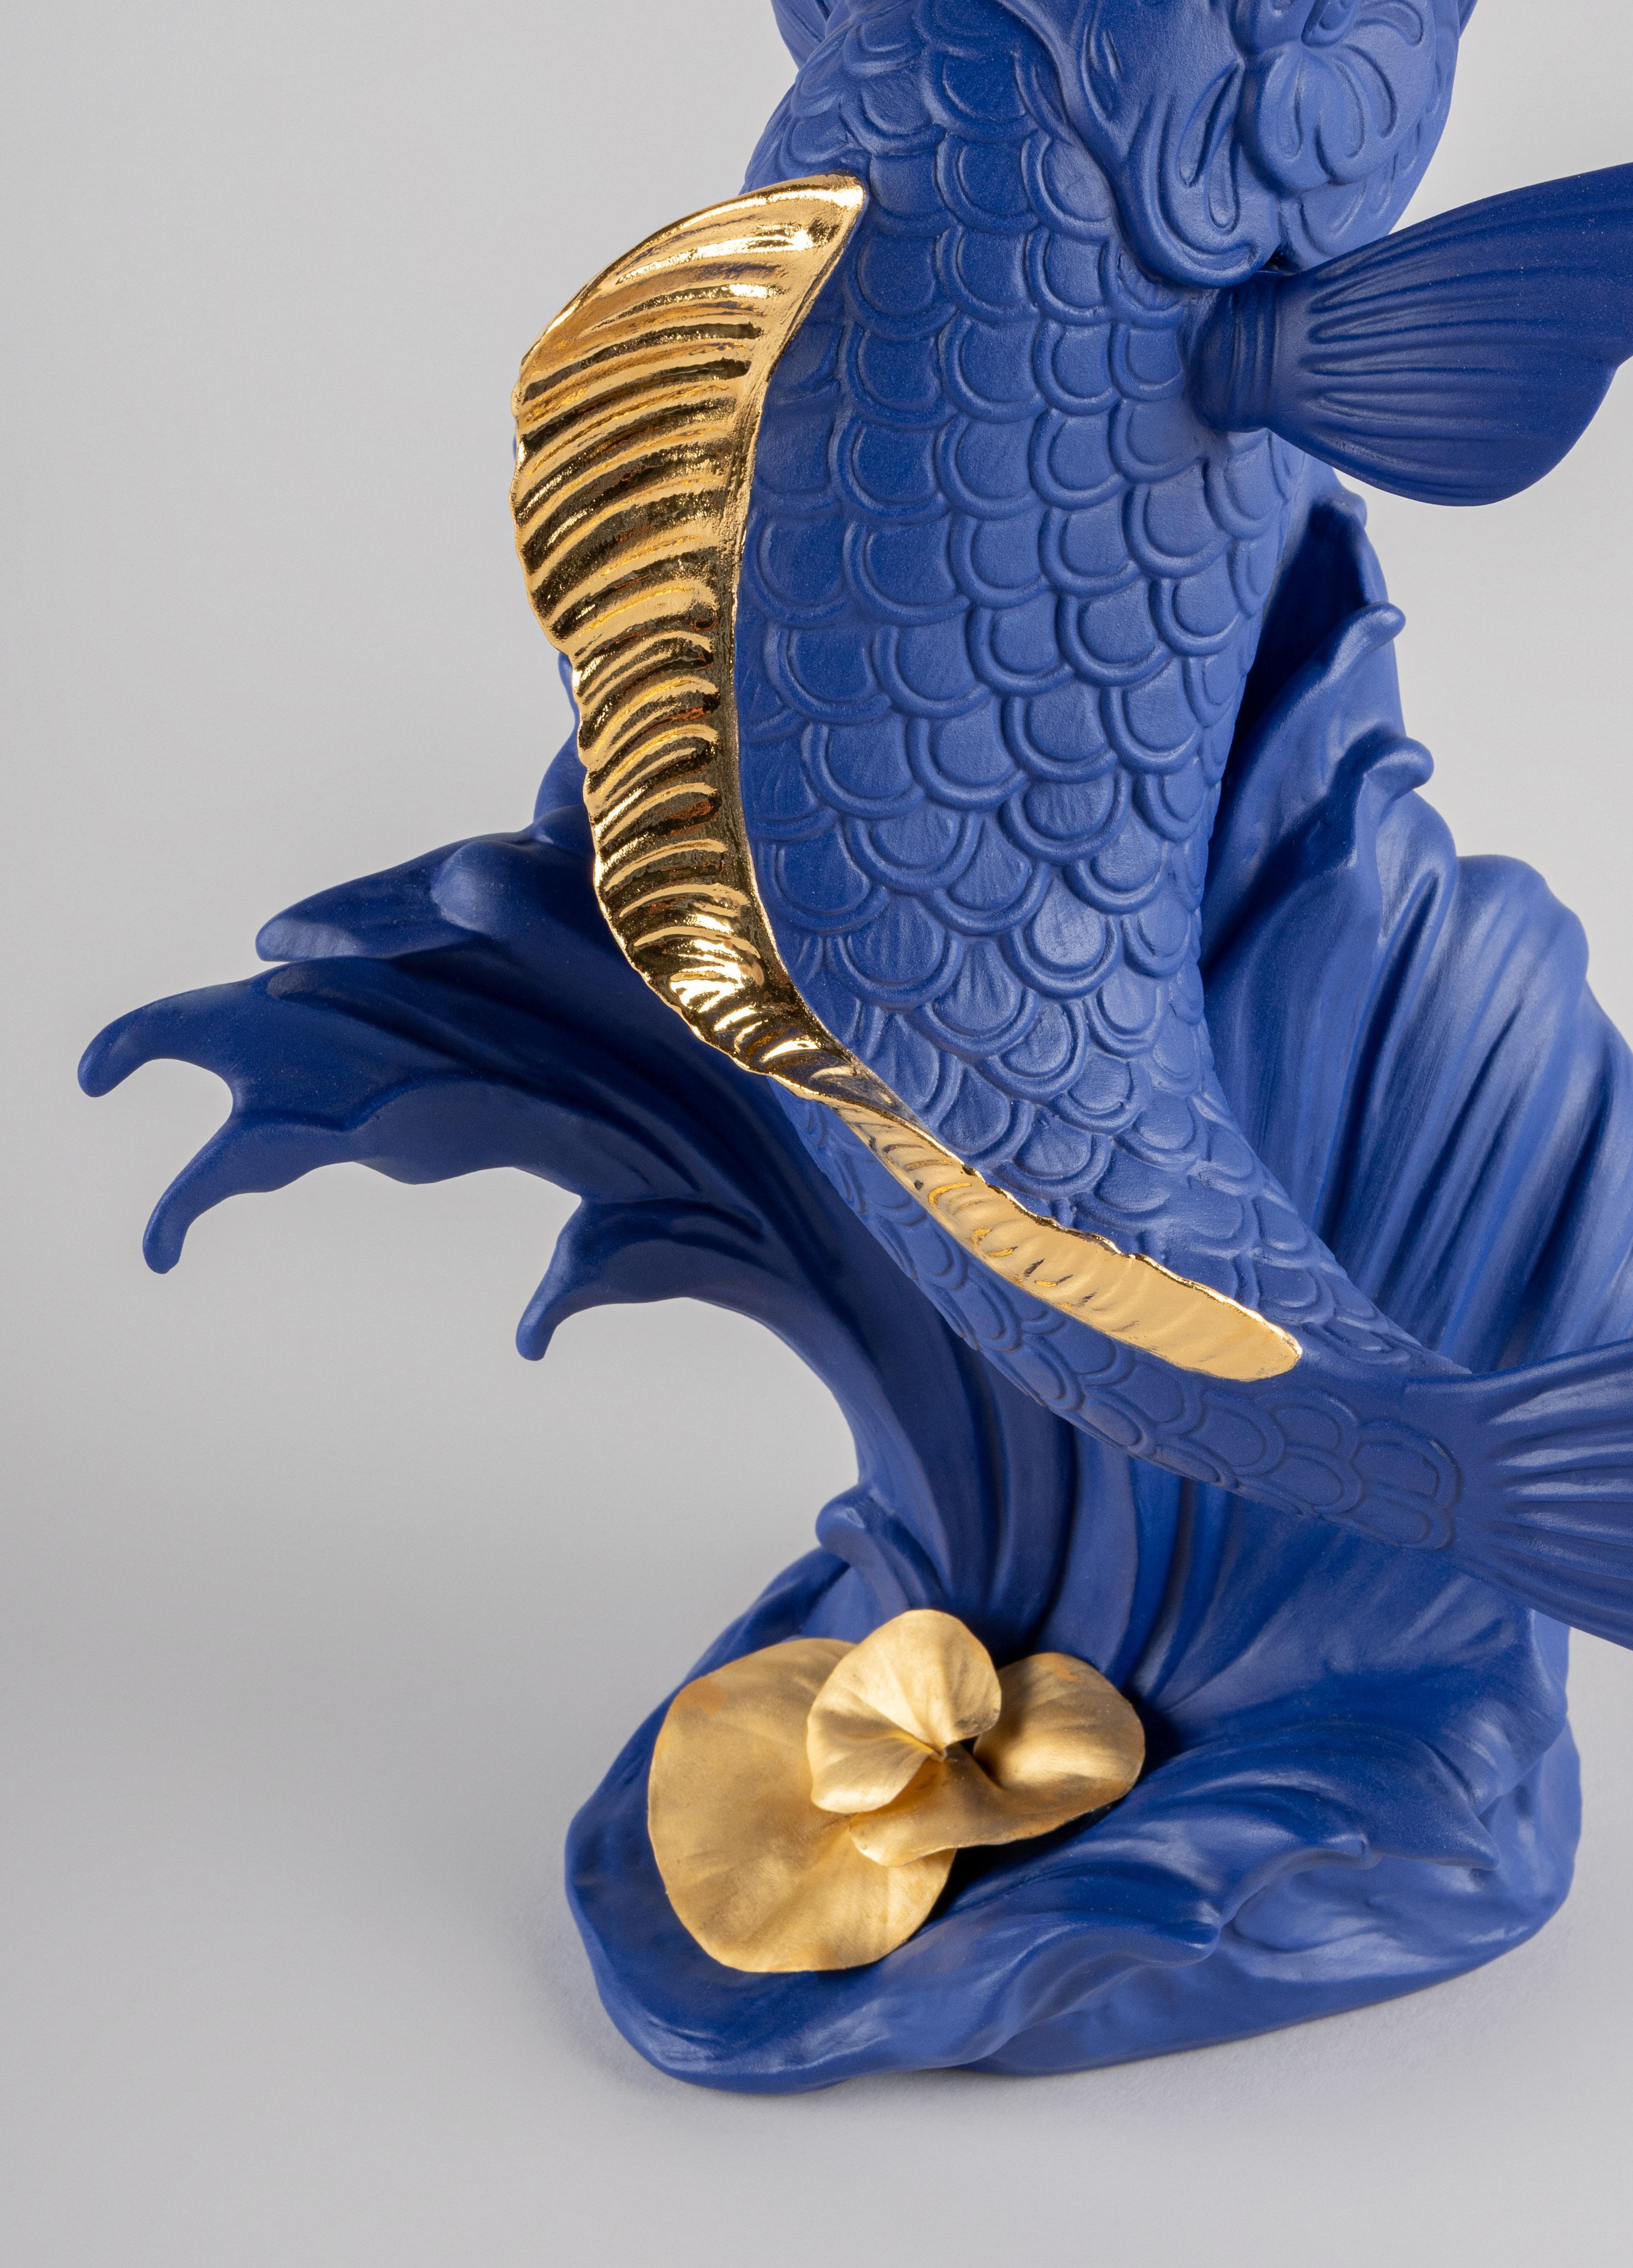 Spanish Lladró Koi Sculpture, Blue-Gold, Limited Edition For Sale